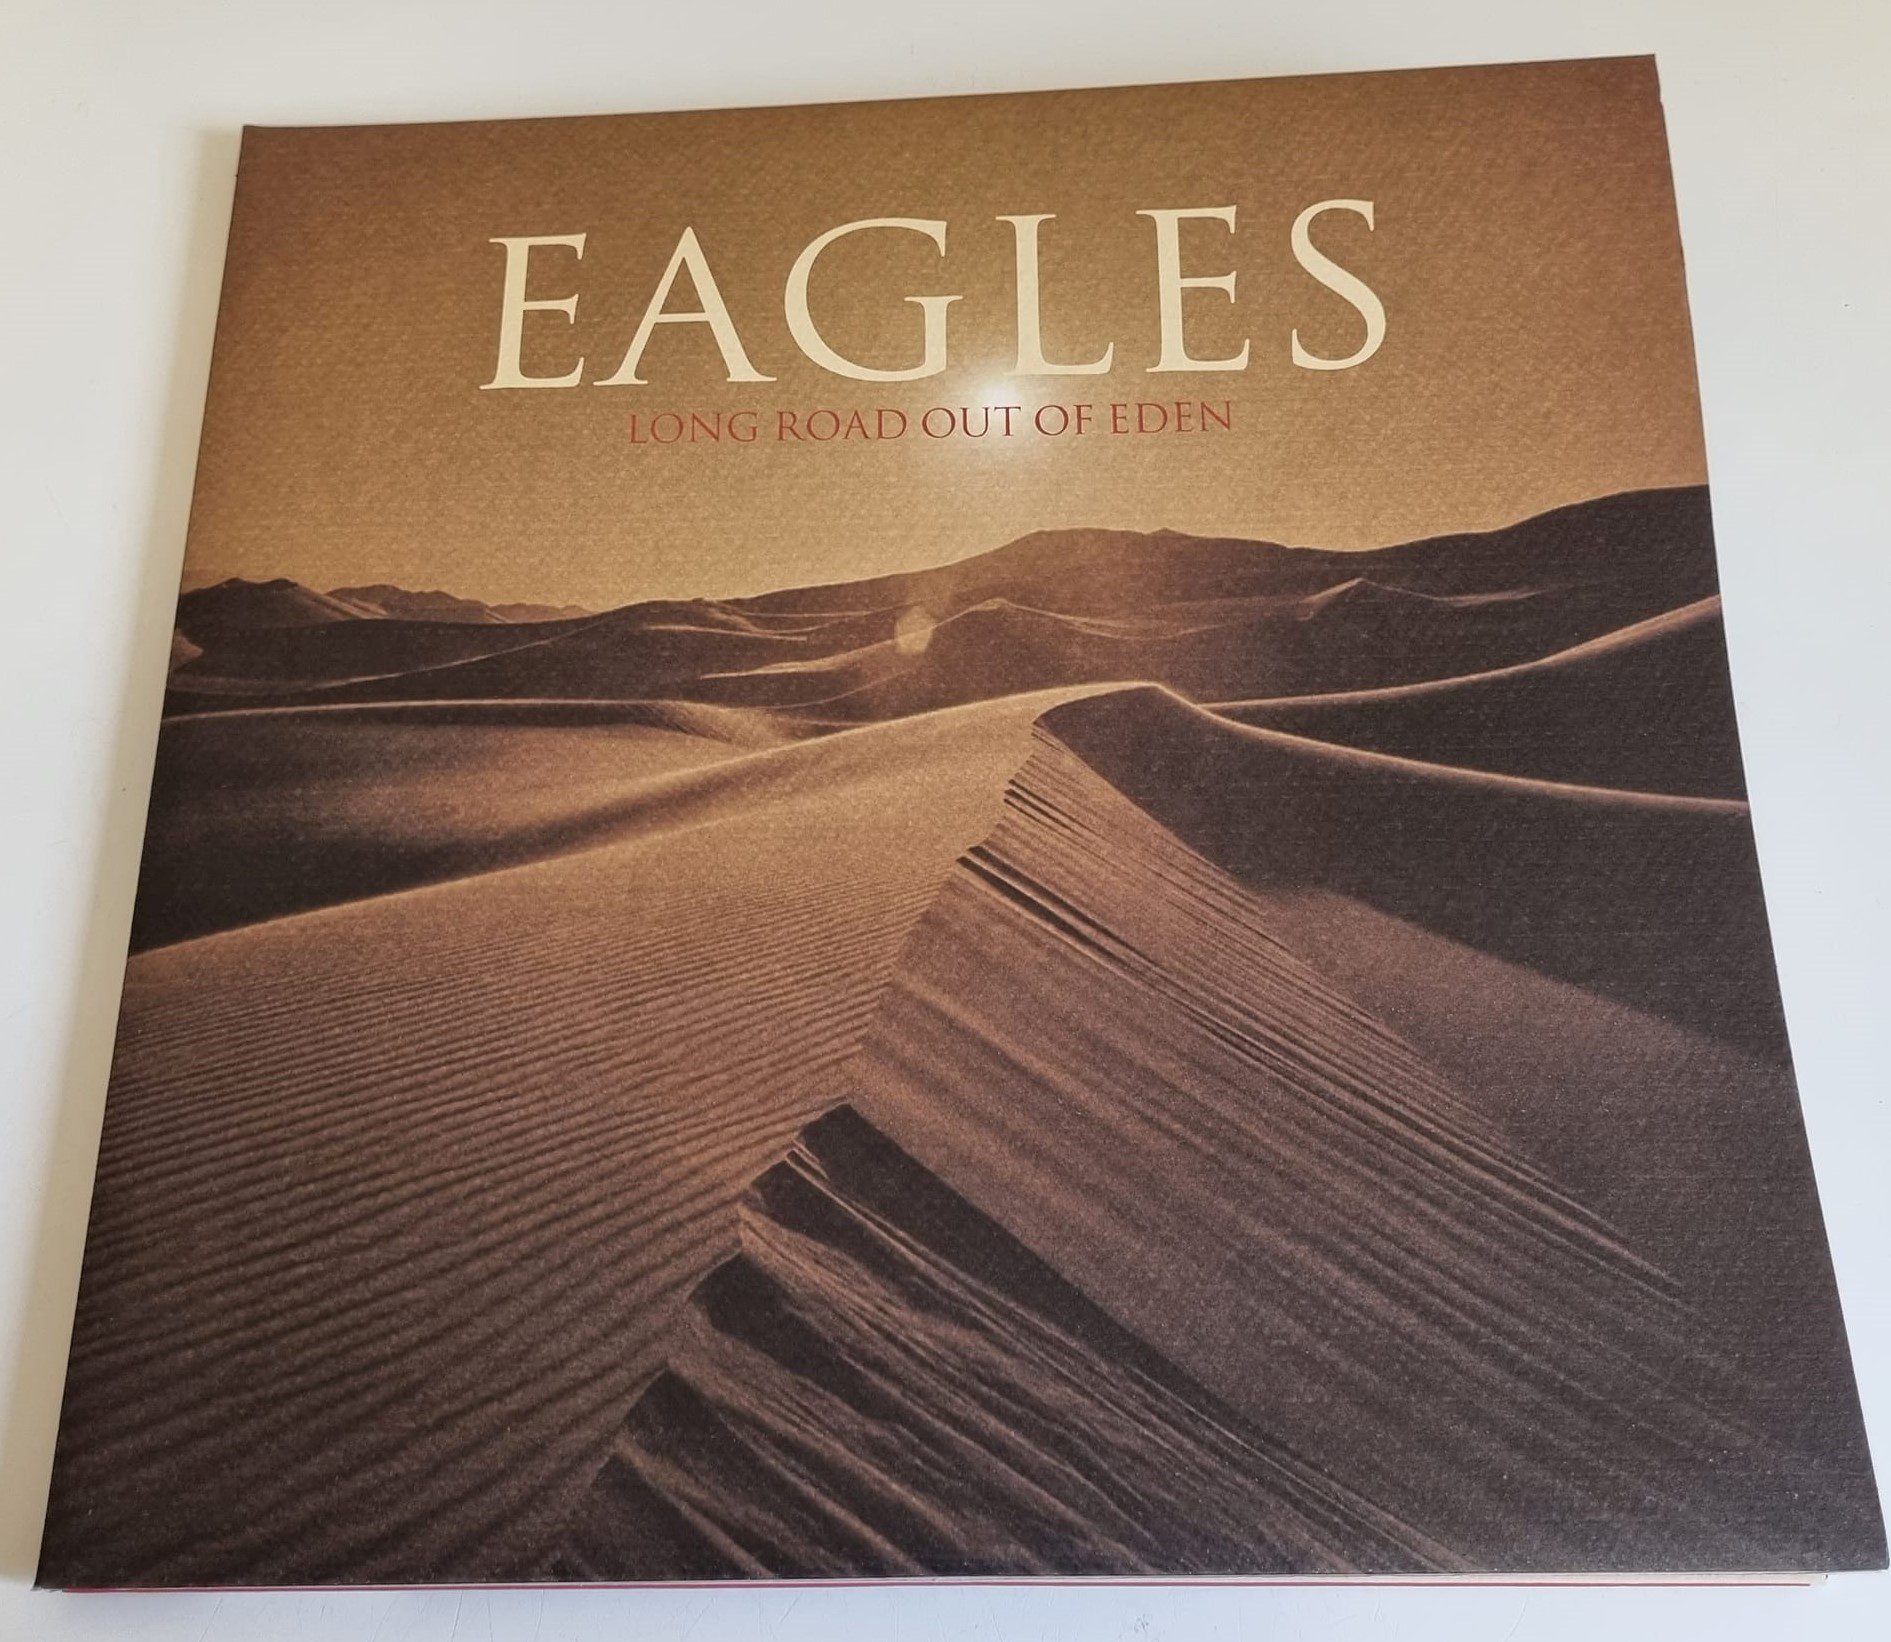 Buy this rare Eagles record by clicking here